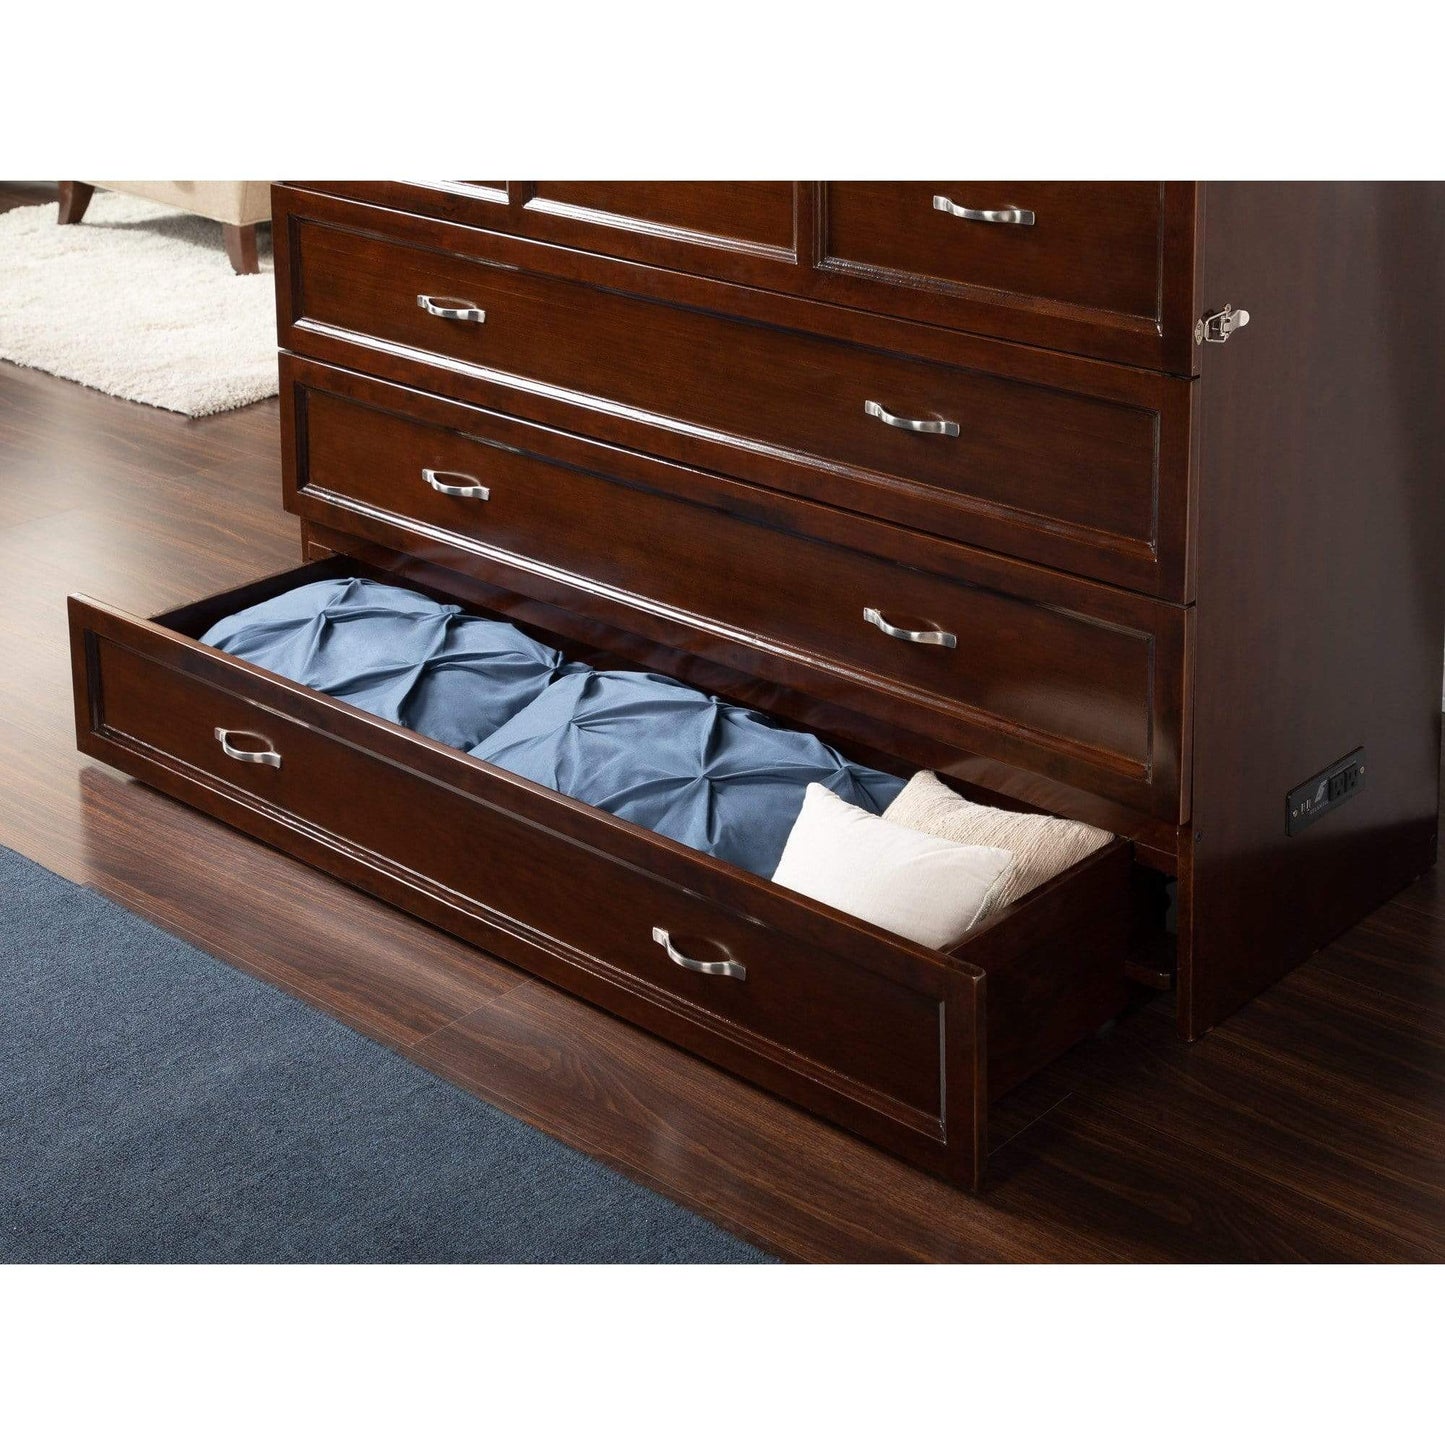 Atlantic Furniture Murphy Bed Chest Deerfield Murphy Bed Chest Queen Antique Walnut with Charging Station